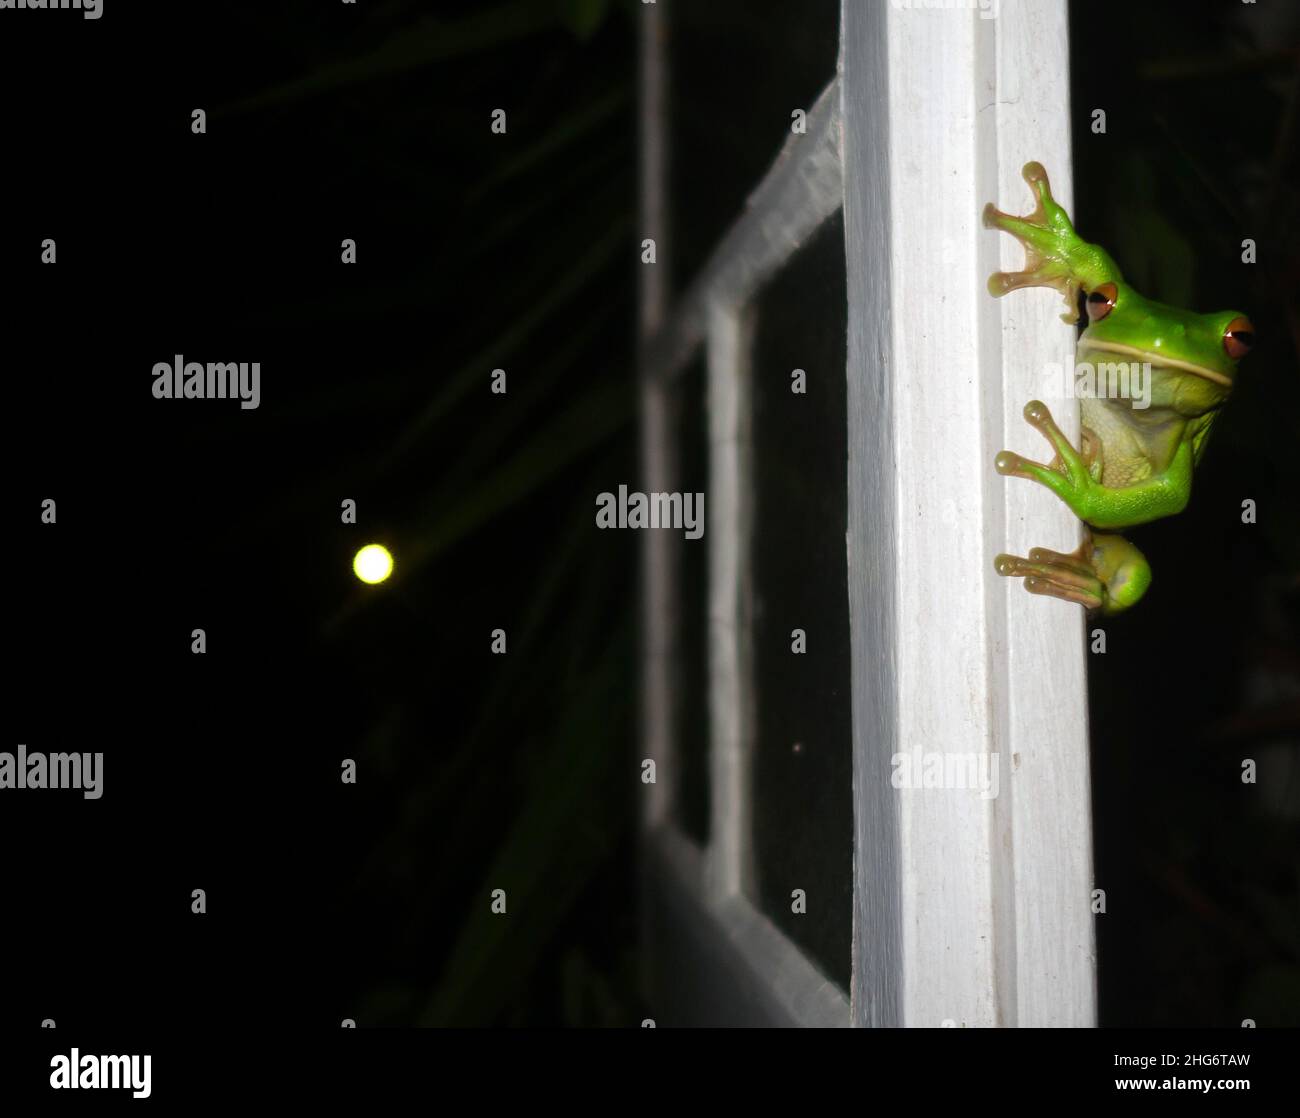 White-lipped tree frog (Litoria infrafrenata) on casement window with moon in background, Cairns, Queensland, Australia Stock Photo